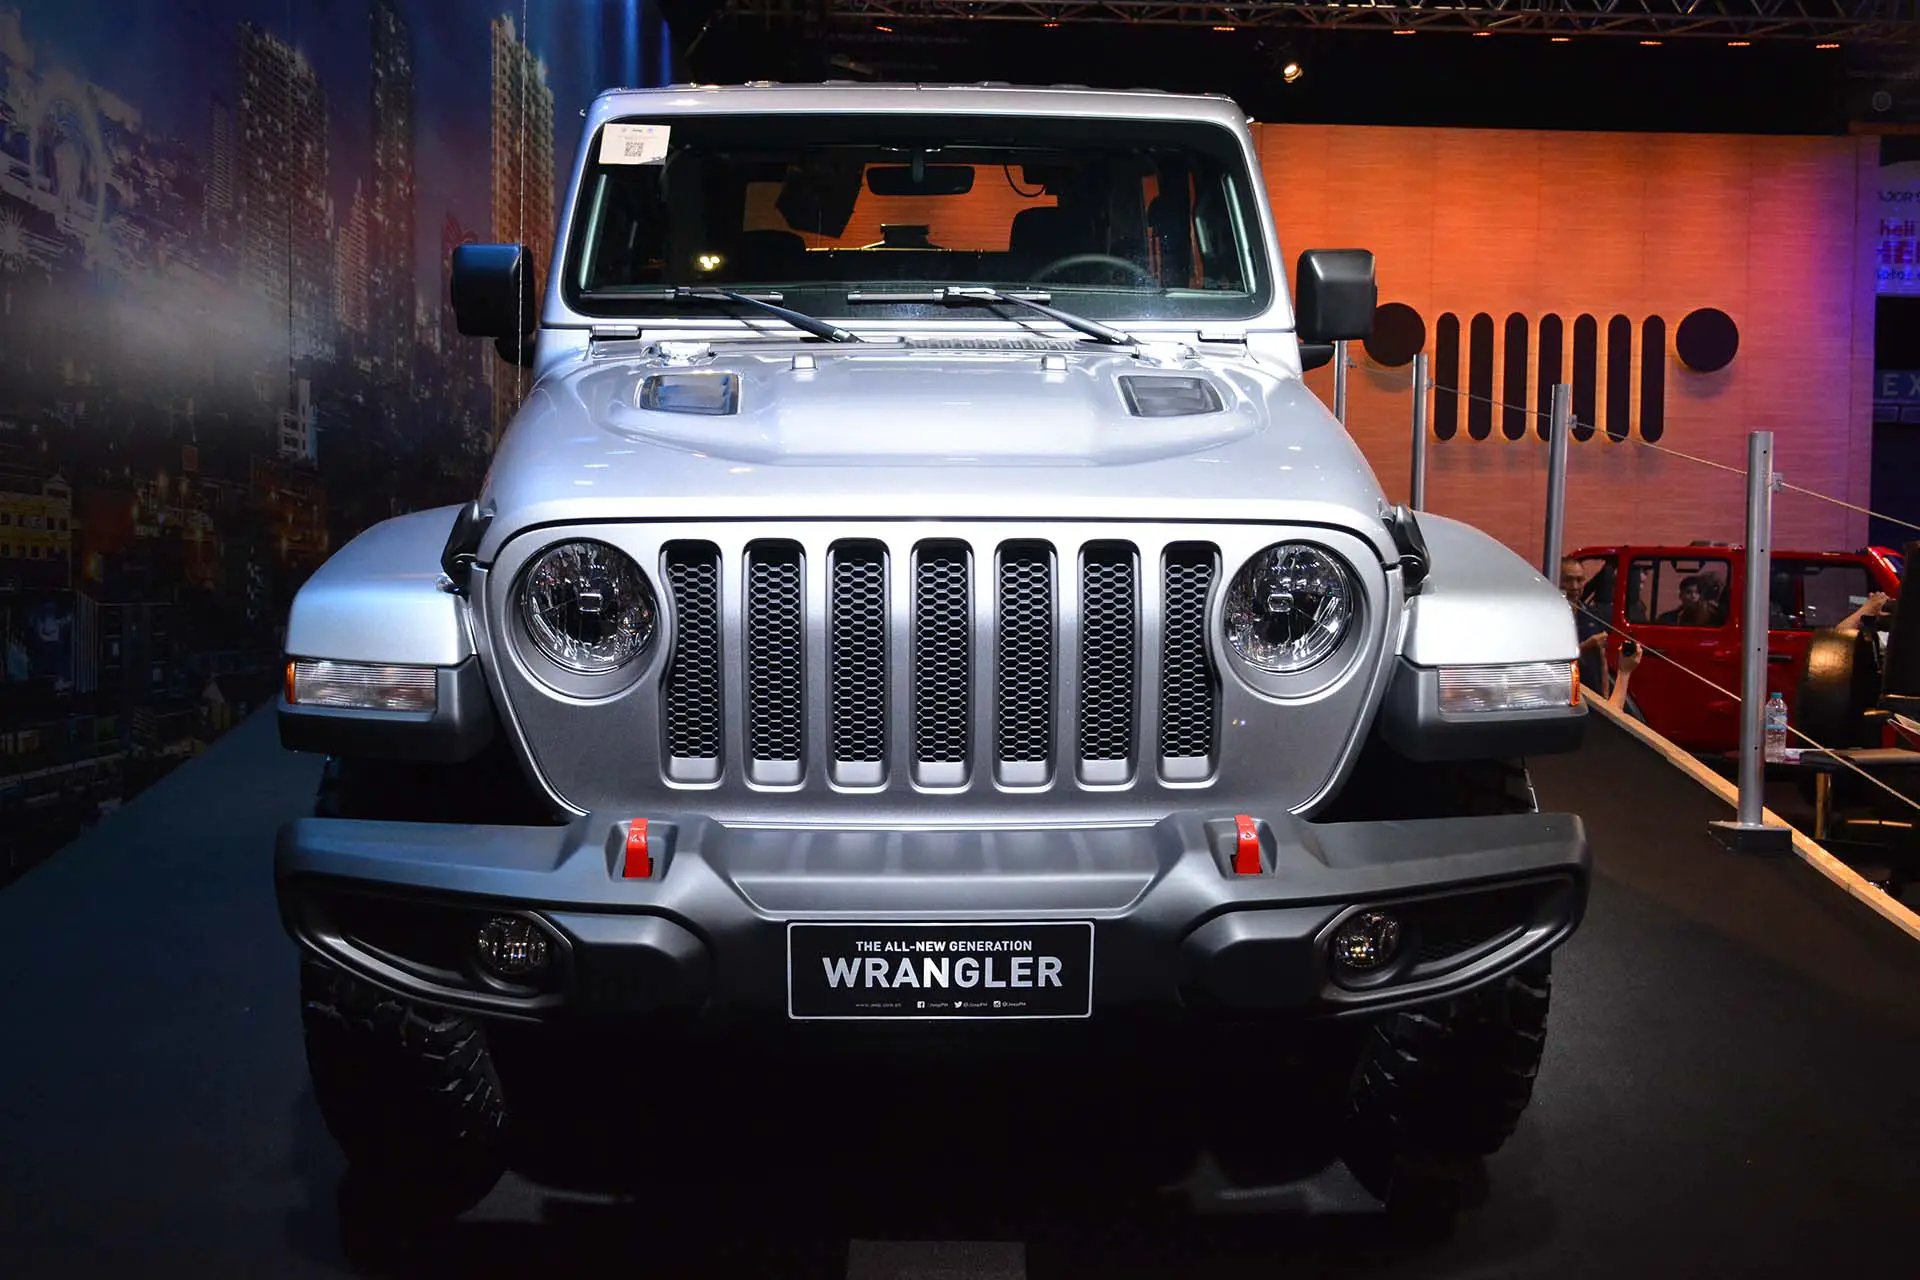 Jeep wrangler at Manila International Auto Show on April 7, 2019 in Pasay, Philippines.